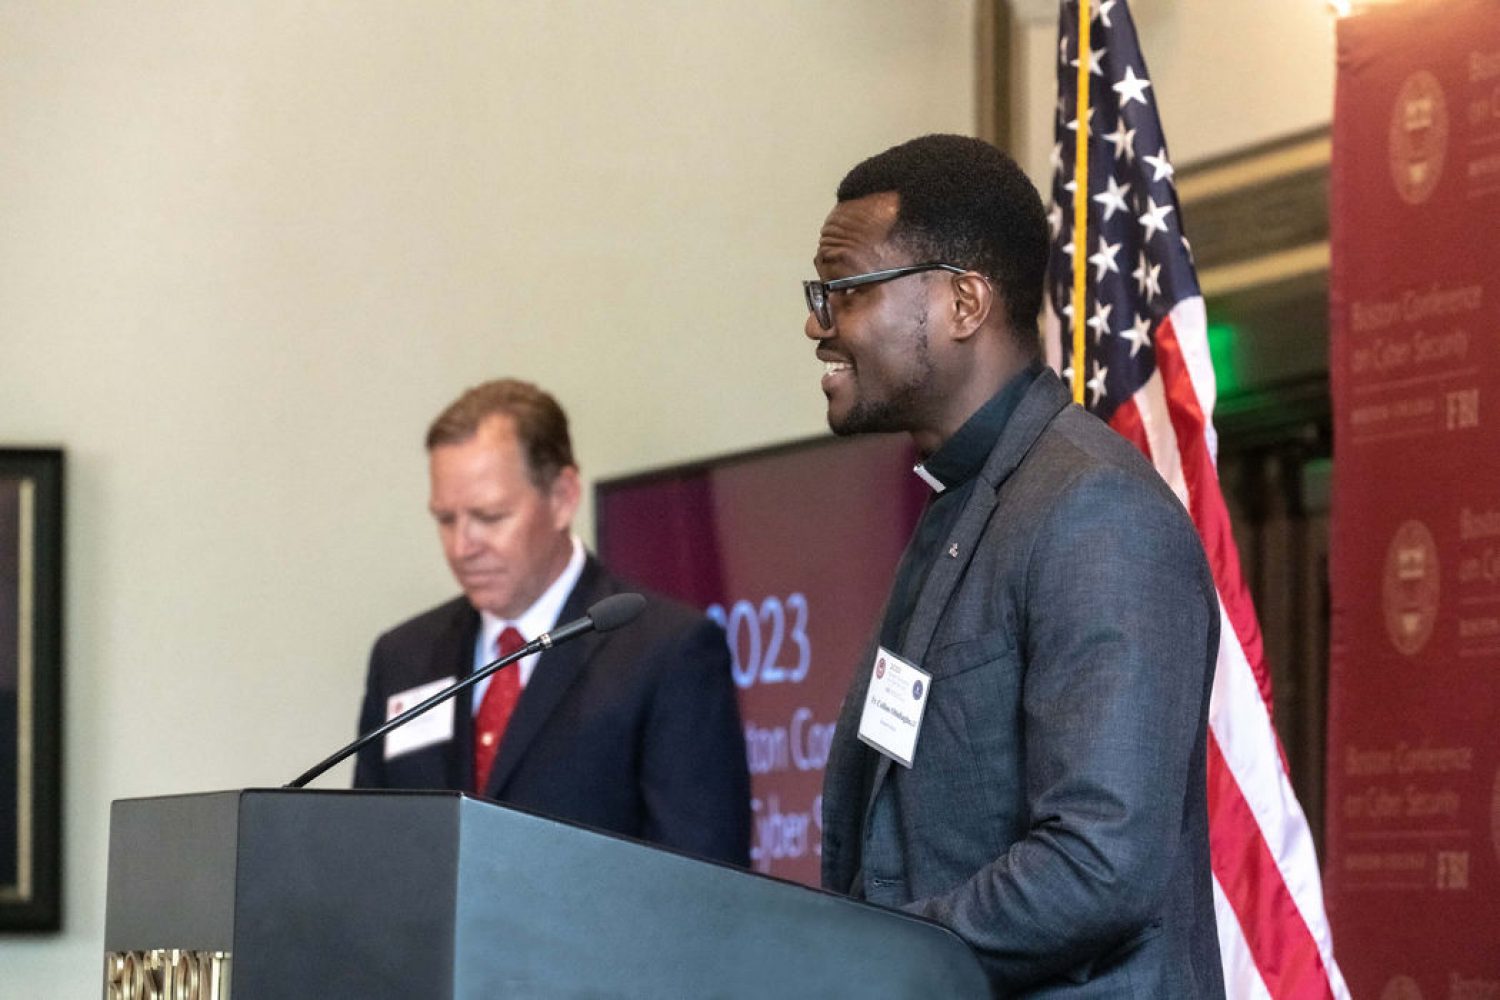 Collins Obidiagha, SJ, at the podium during the cybersecurity confereince